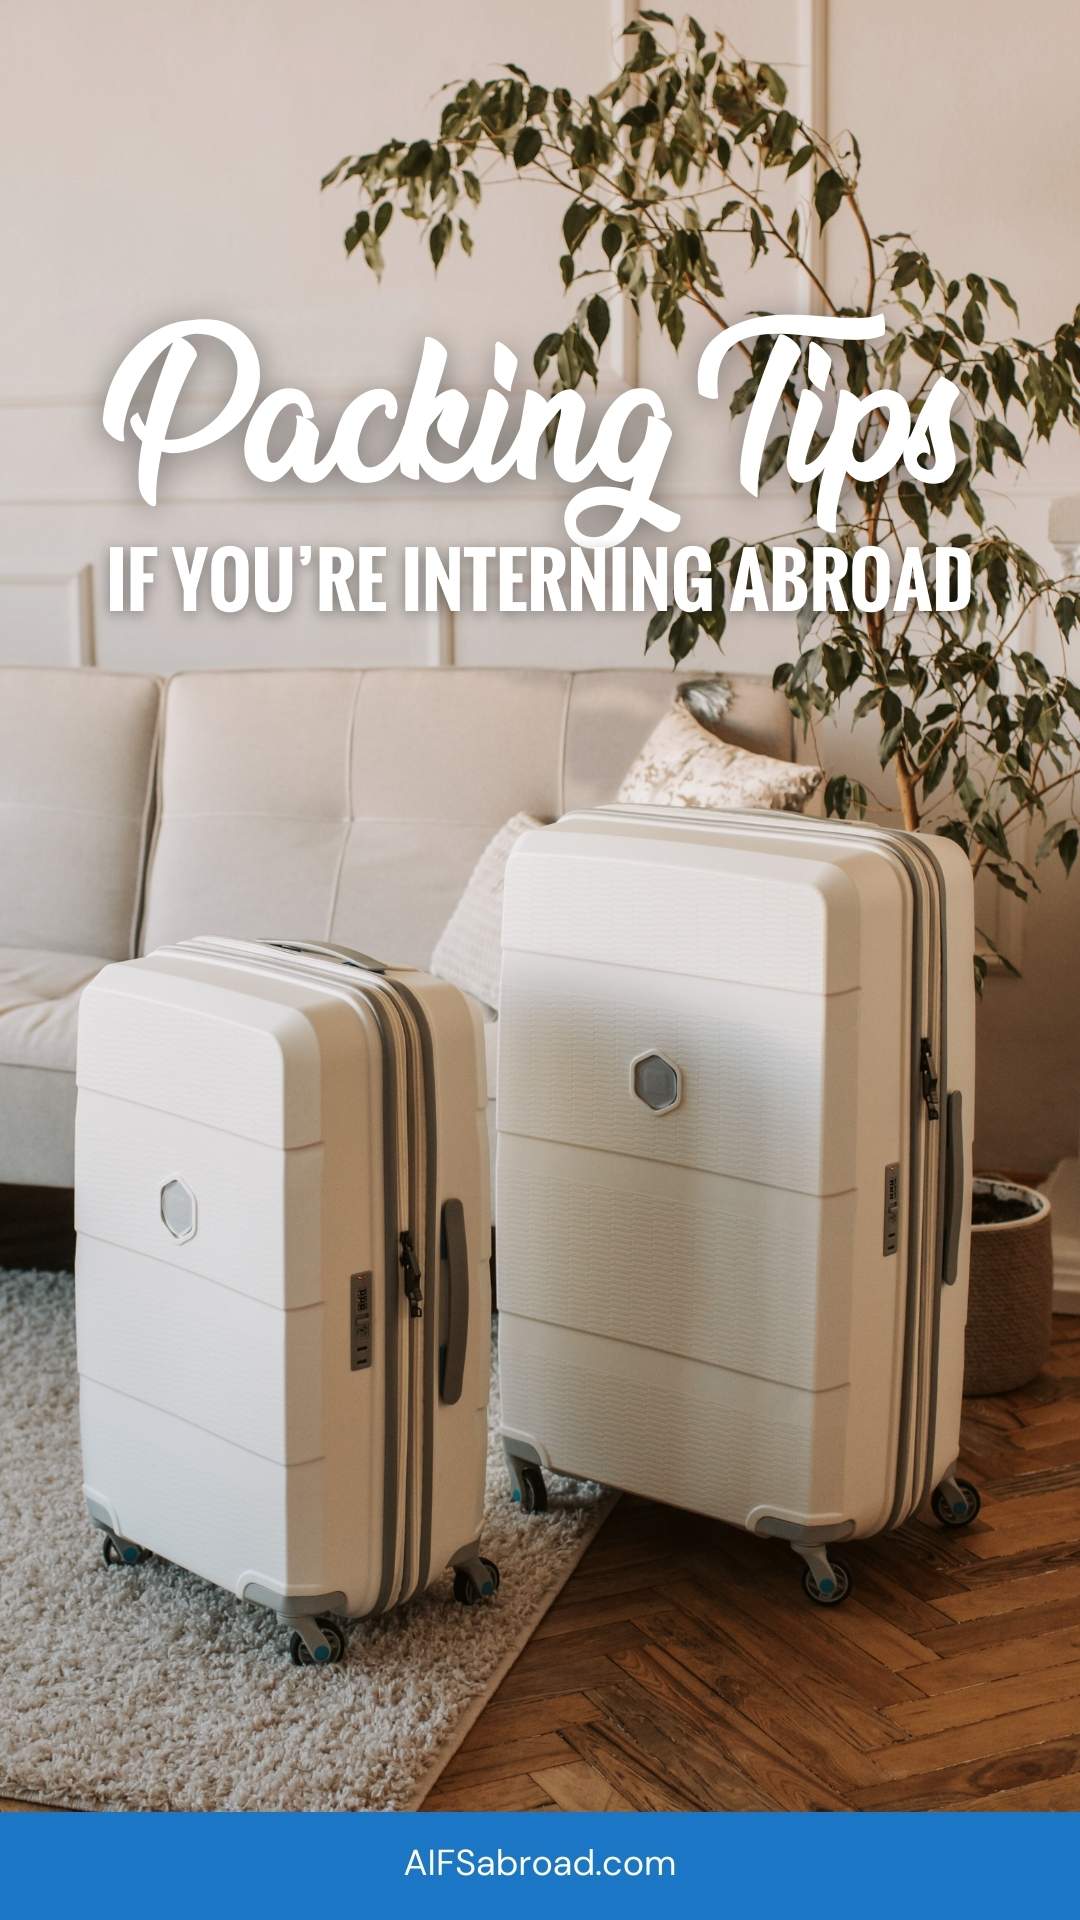 Pin image: Two suitcases with text overlay about how to pack for an internship abroad